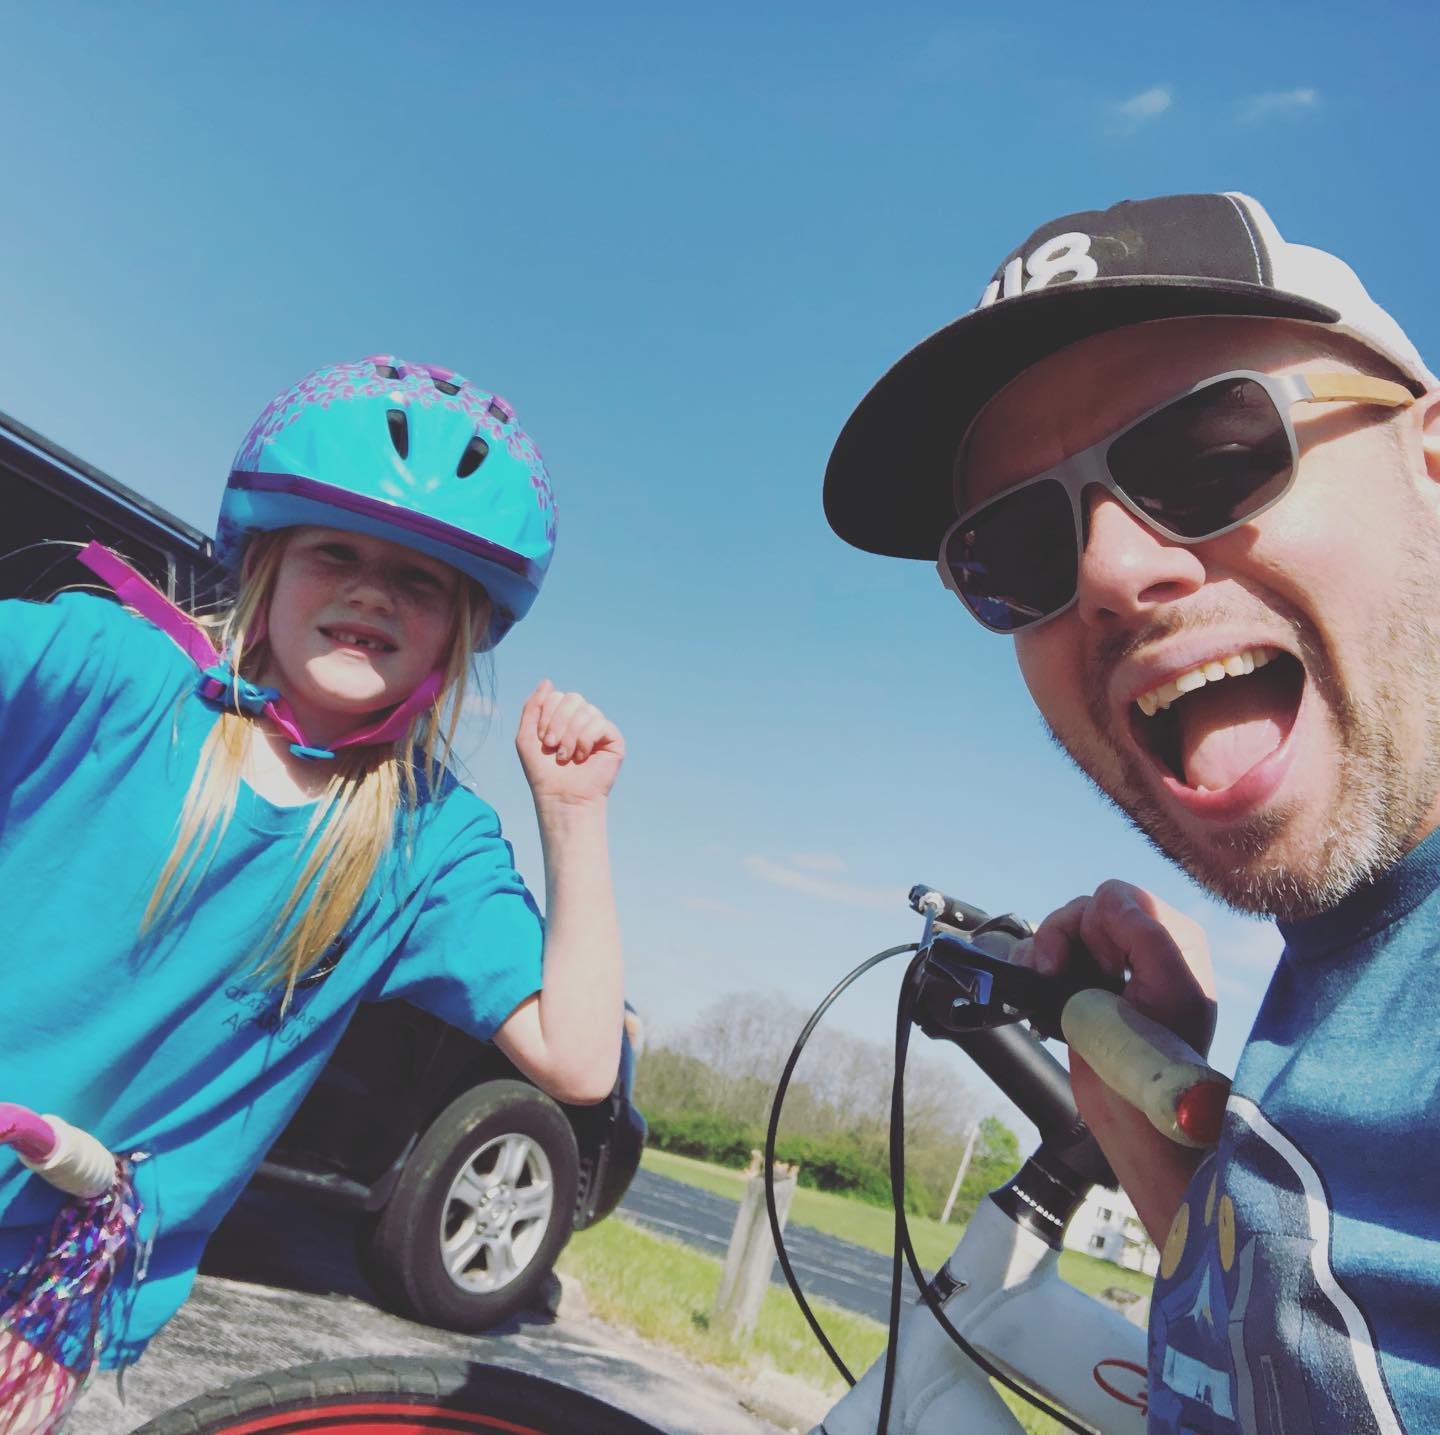 Just getting our daily outdoor rec time! #DadDaughter #Biking